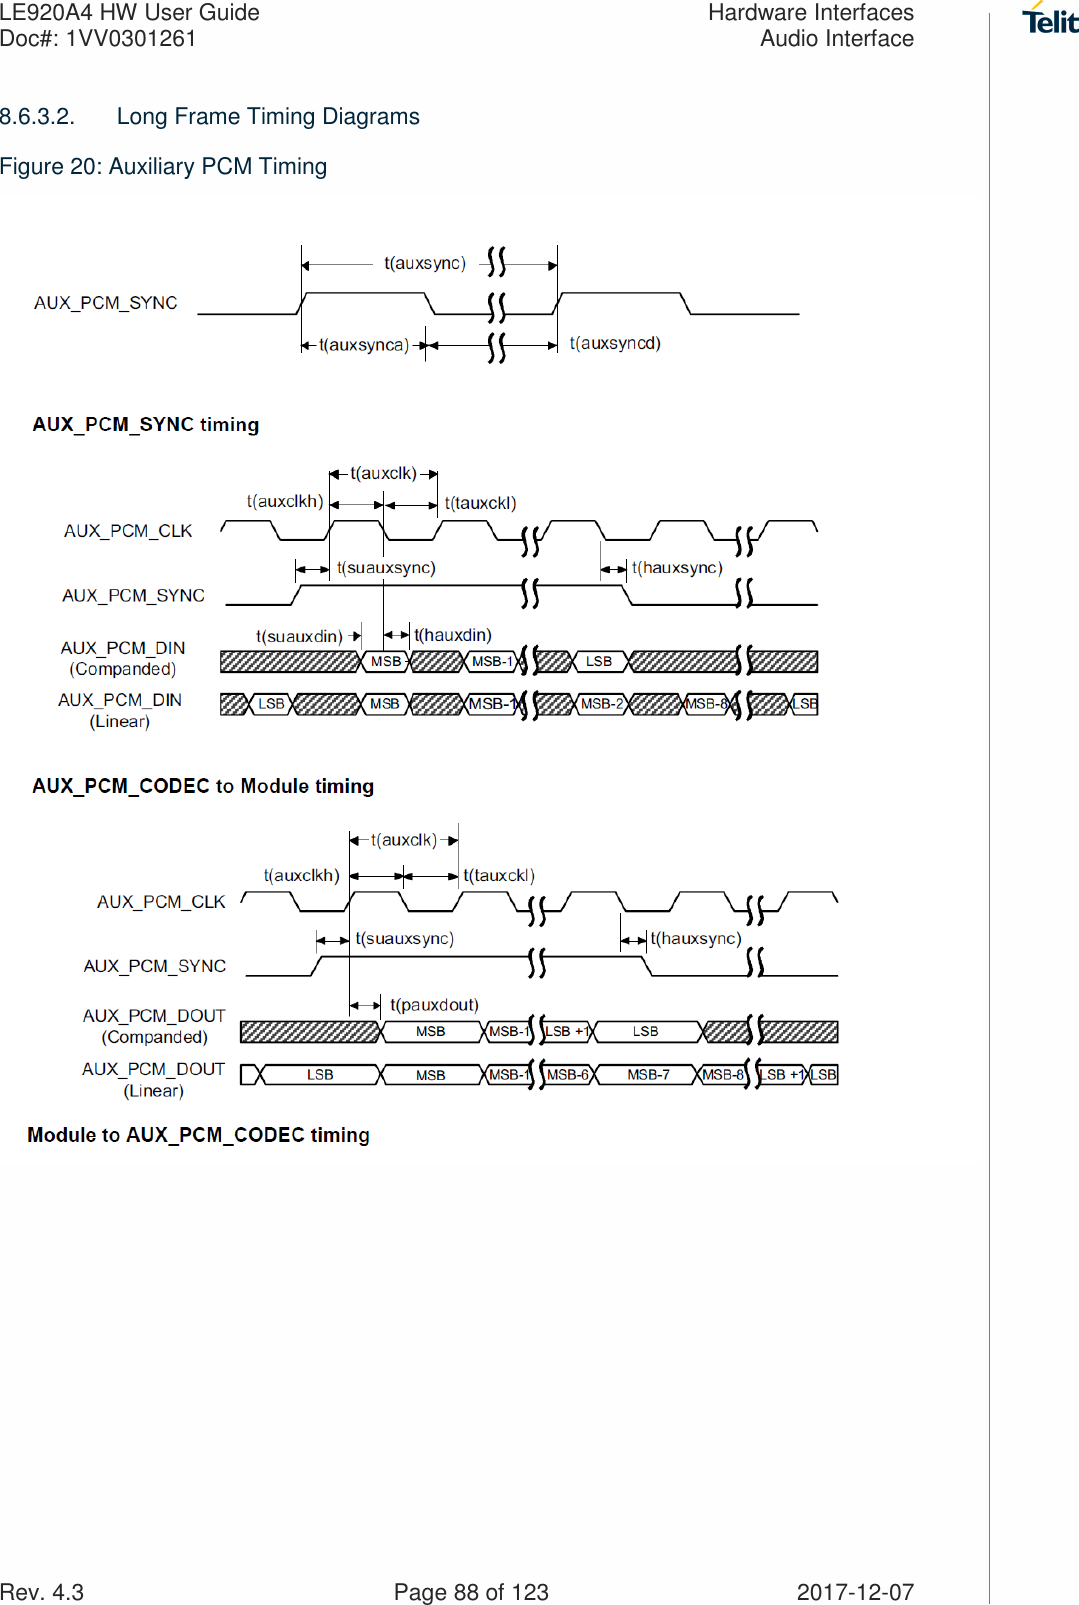 LE920A4 HW User Guide  Hardware Interfaces Doc#: 1VV0301261  Audio Interface Rev. 4.3    Page 88 of 123  2017-12-07 8.6.3.2.  Long Frame Timing Diagrams Figure 20: Auxiliary PCM Timing  